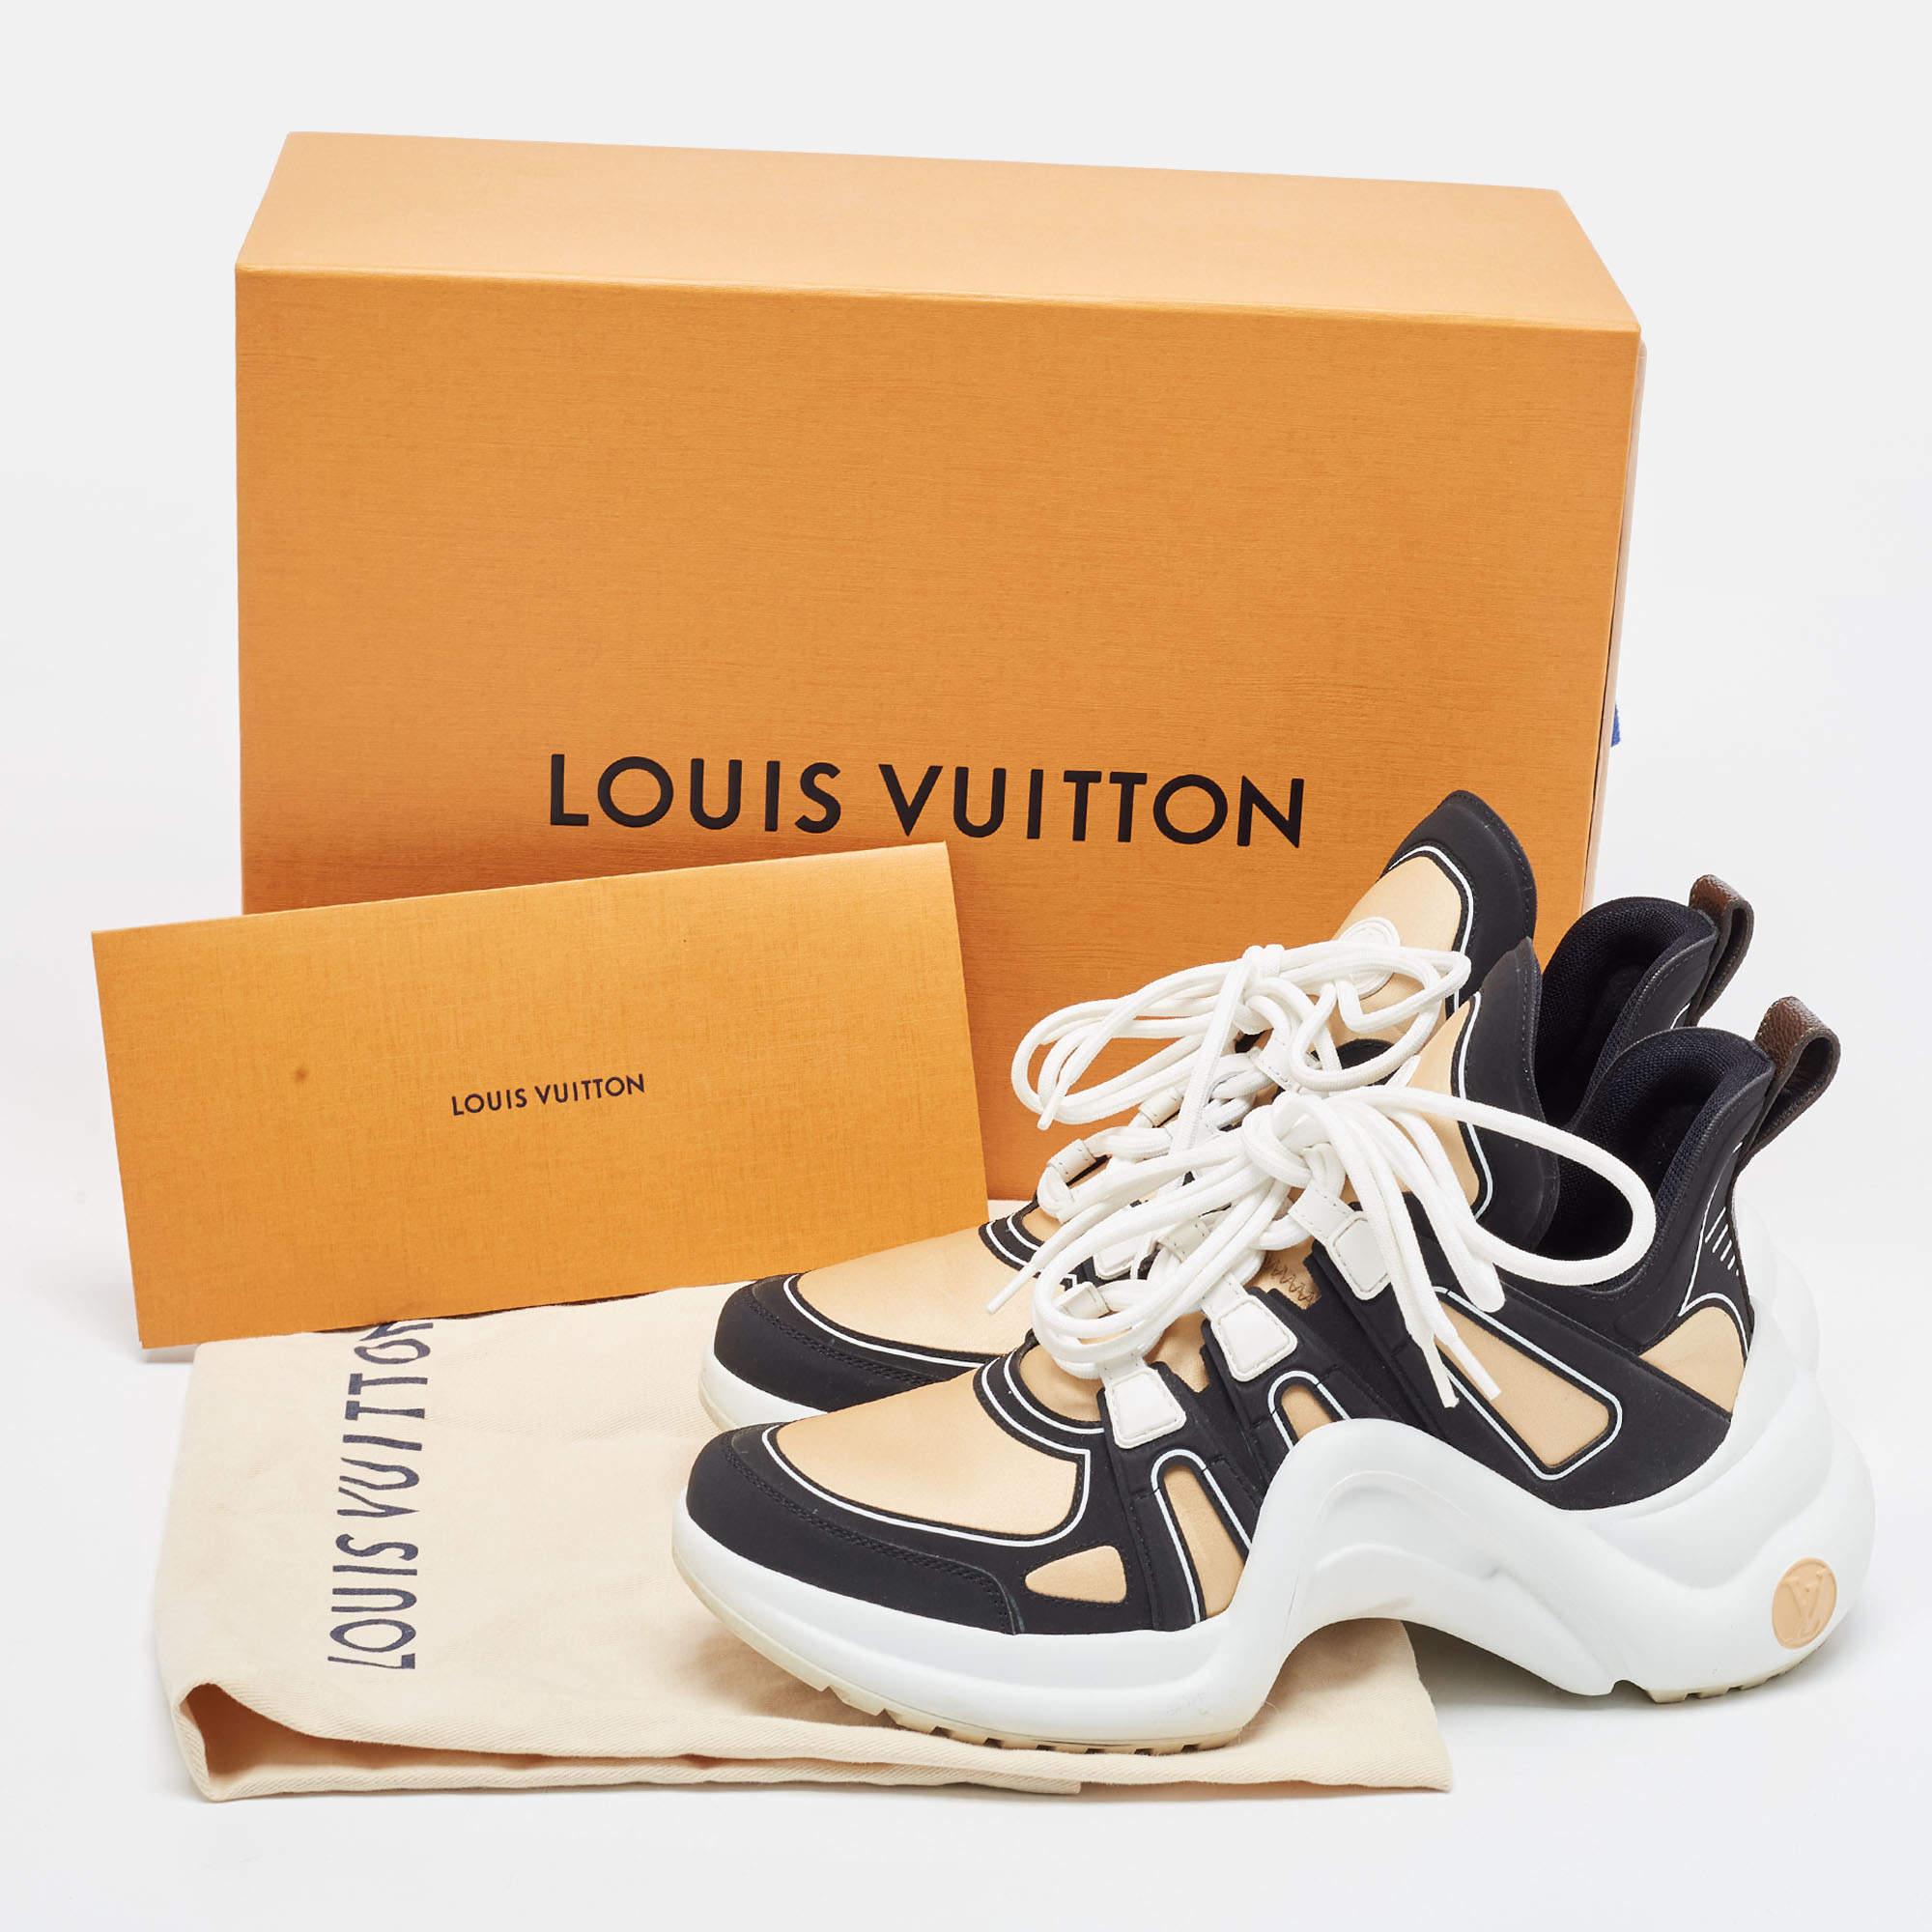 Louis Vuitton Brown/Black Nylon and Leather Archlight Sneakers Size 39 For Sale 1